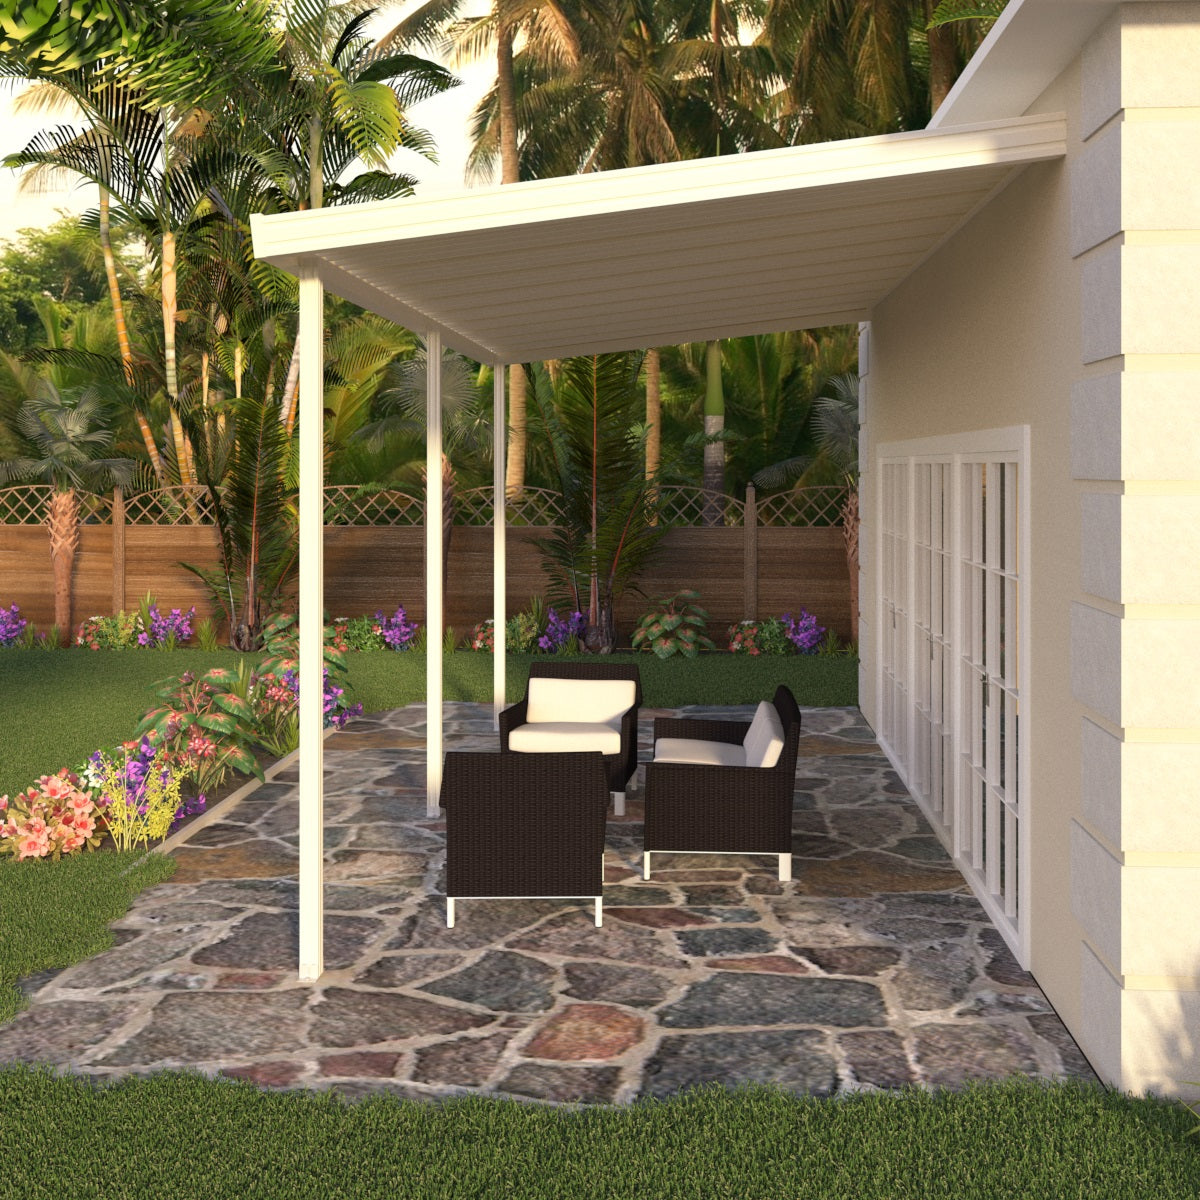 10 ft. Deep x 22 ft. Wide Ivory Attached Aluminum Patio Cover - 3 Posts - (10lb Low Snow Area)